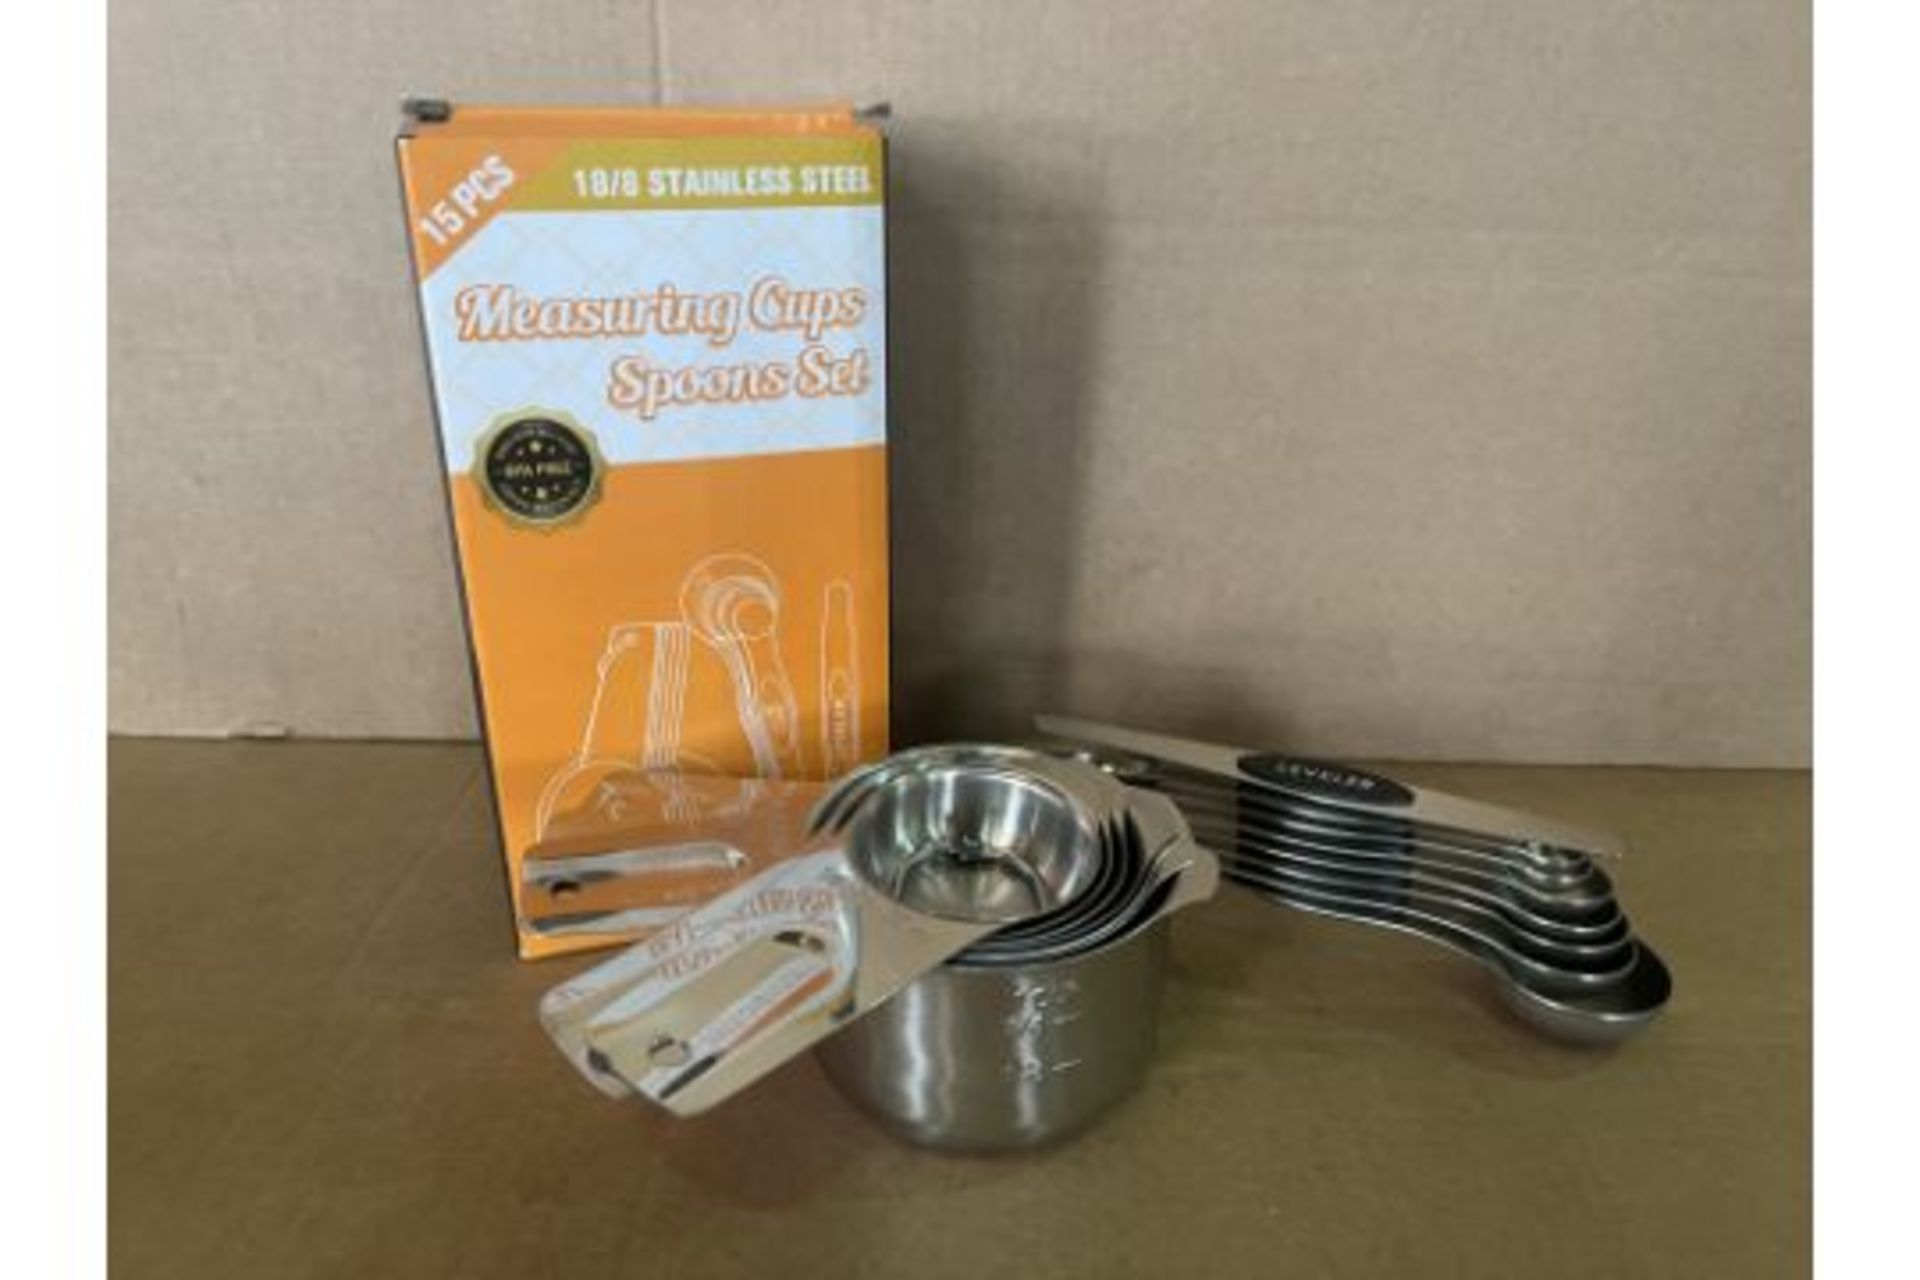 15 X BRAND NEW 15 PIECE STAINLESS STEEL MEASURING CUPS AND SPOON SETS BPA FREE R15